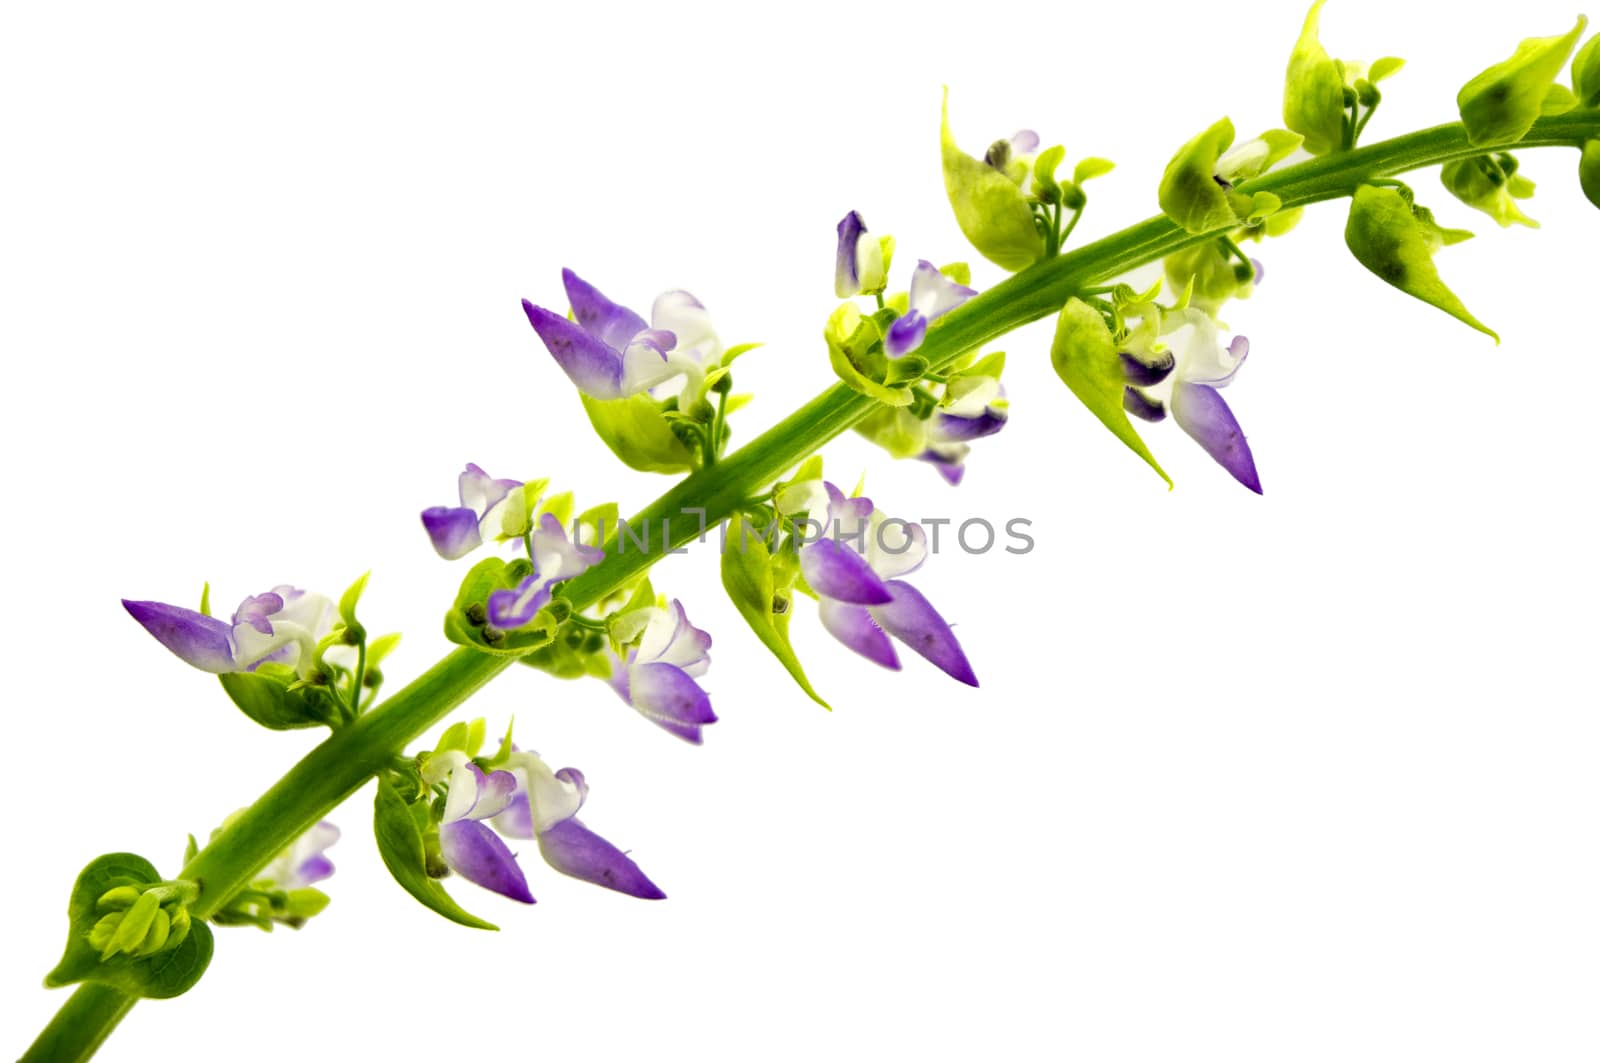 Coleus flowers isolated on white background. For your commercial and editorial use